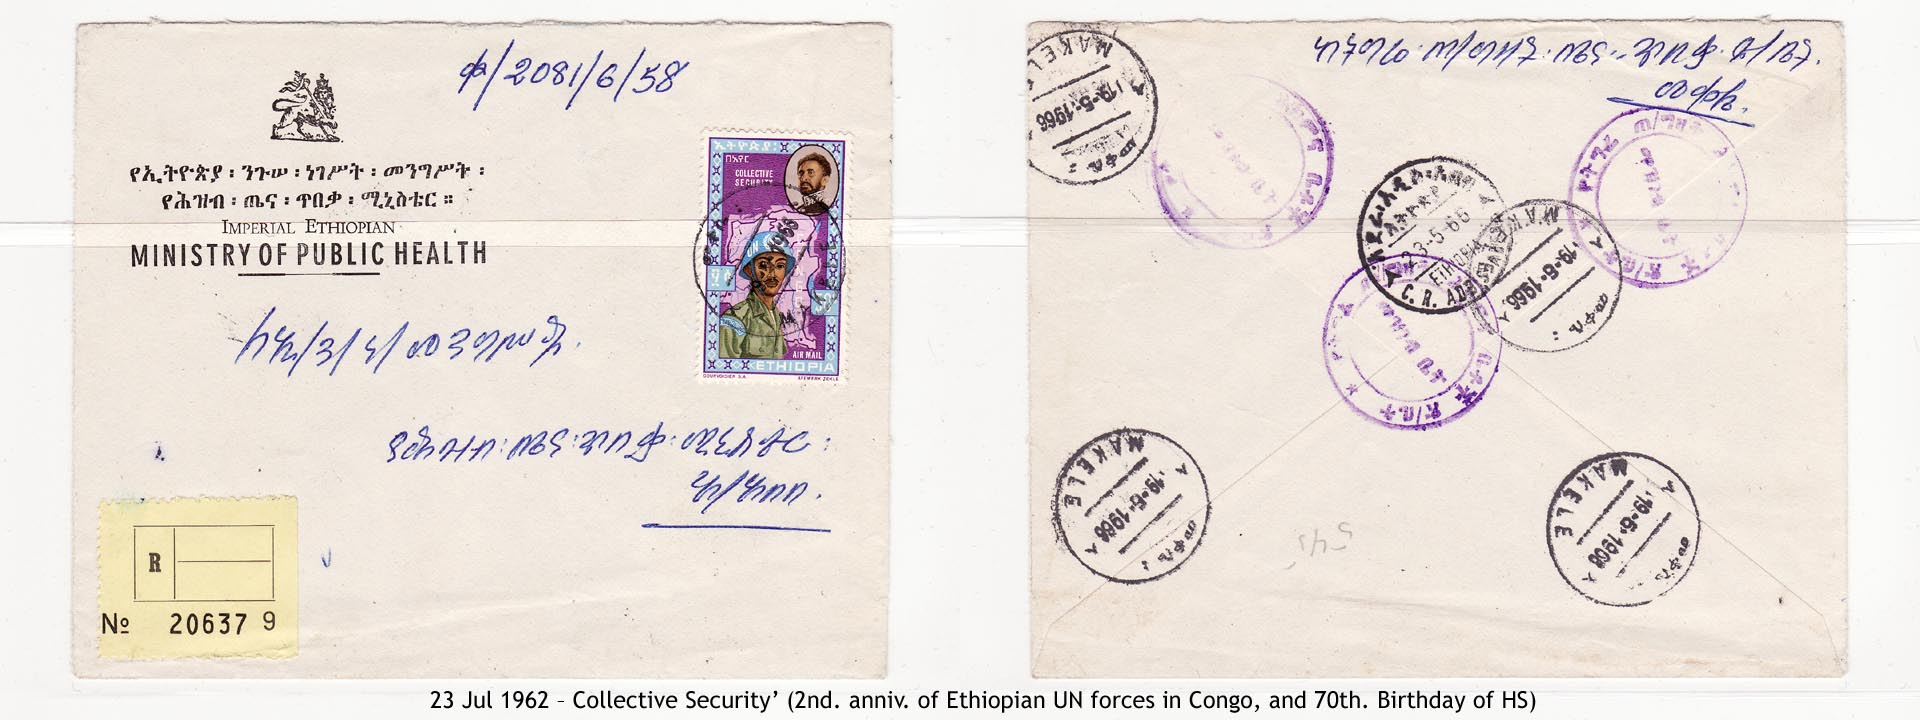 19620723 – Collective Security’ (2nd. anniv. of Ethiopian UN forces in Congo, and 70th. Birthday of HS)